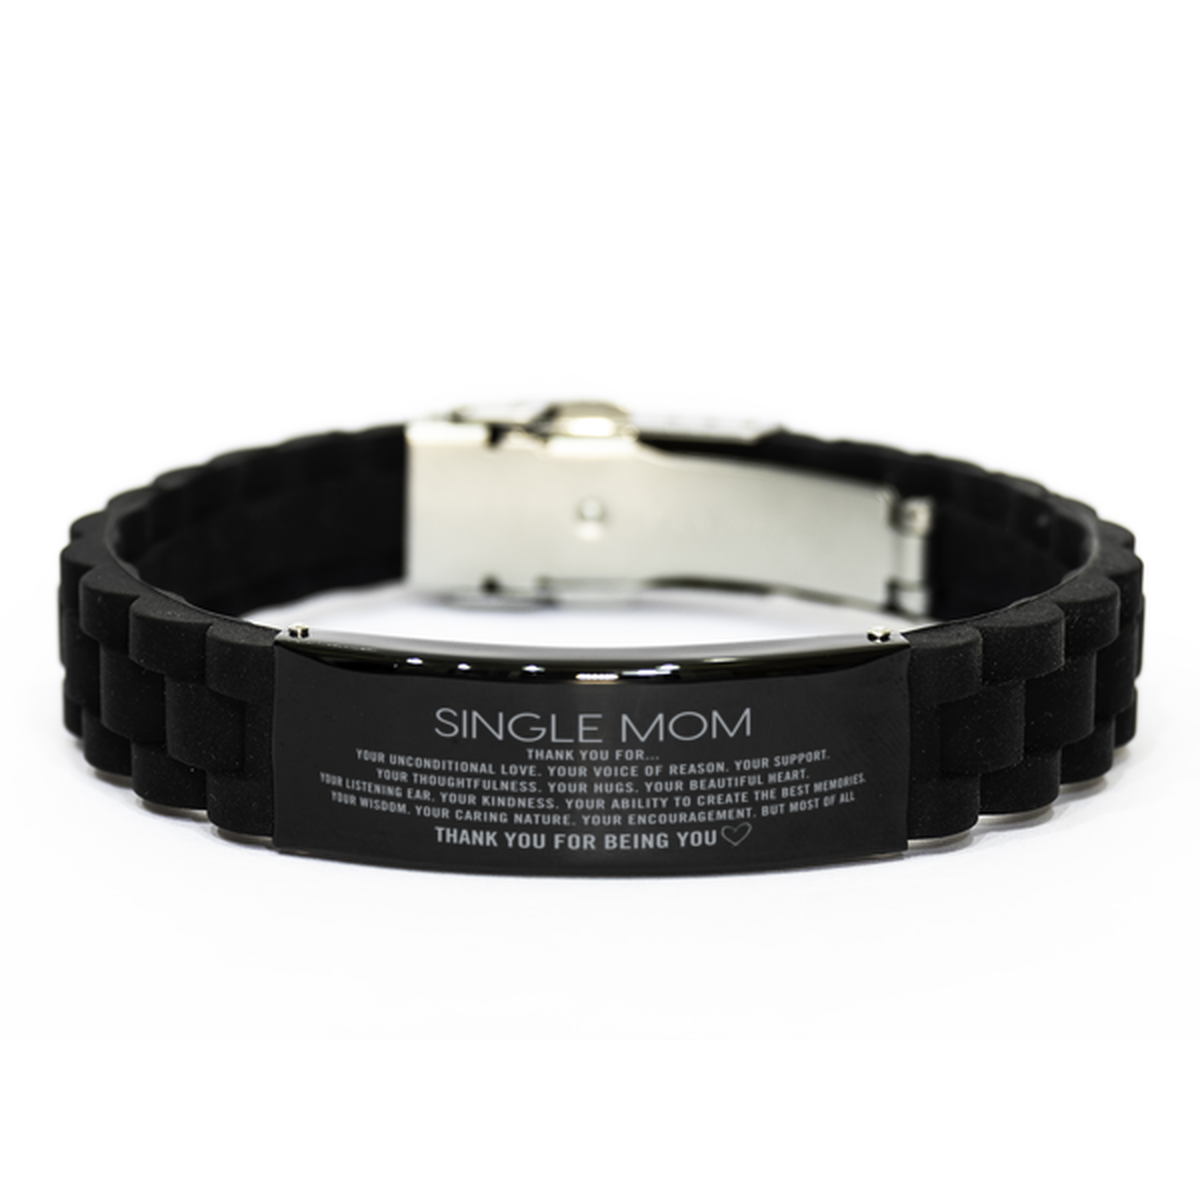 Single Mom Black Glidelock Clasp Bracelet Custom, Engraved Gifts For Single Mom Christmas Graduation Birthday Gifts for Men Women Single Mom Thank you for Your unconditional love